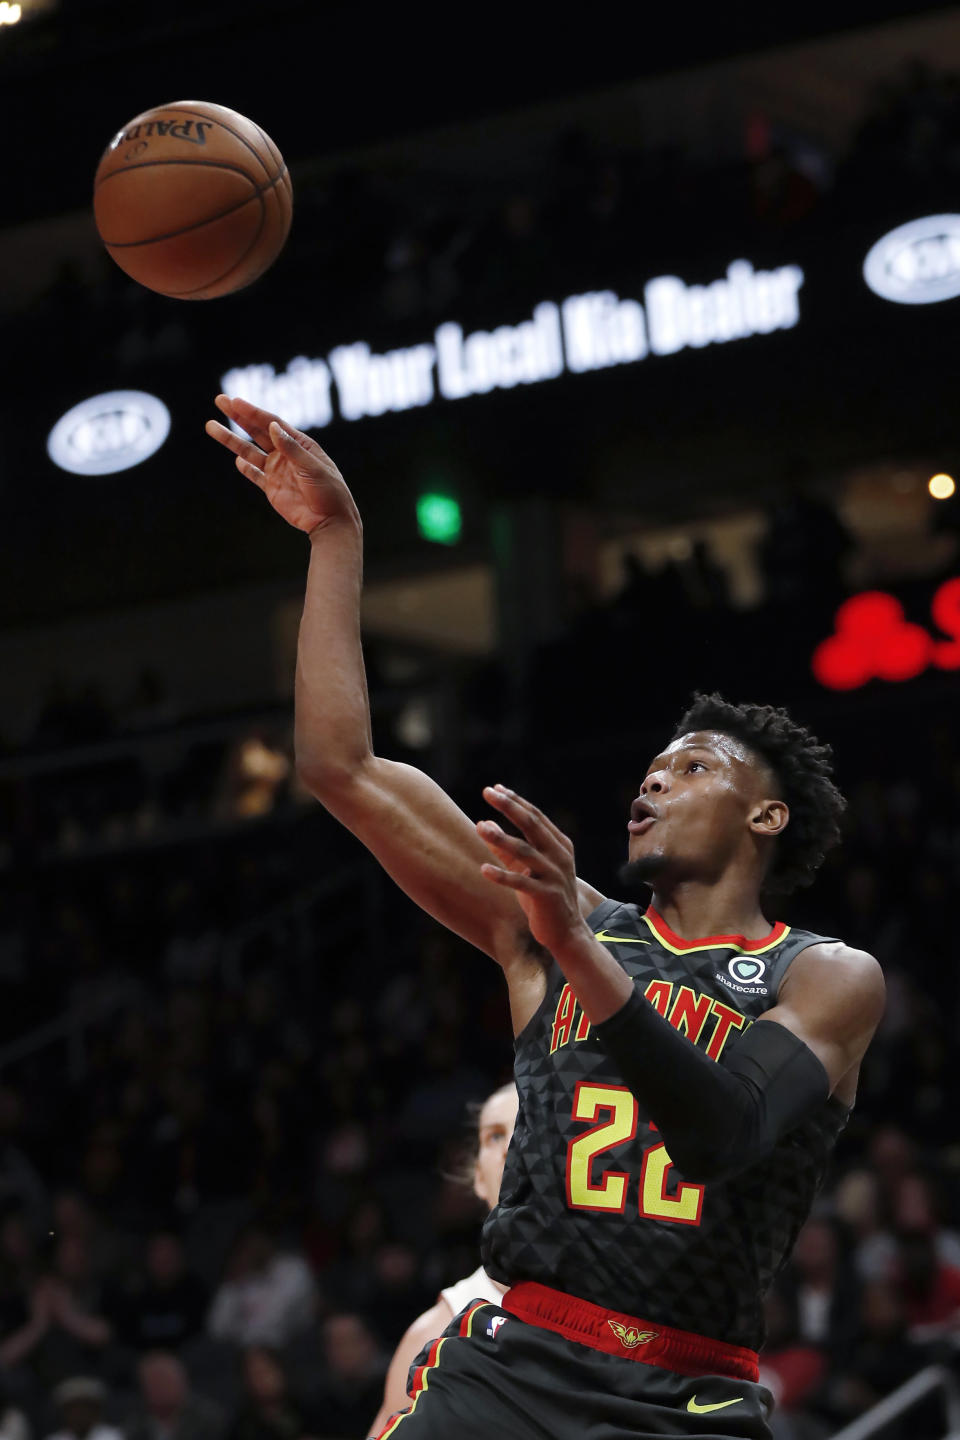 Atlanta Hawks guard Cam Reddish (22) passes the ball during the first half of the team's NBA basketball game against the Miami Heat on Thursday, Oct. 31, 2019, in Atlanta. (AP Photo/John Bazemore)